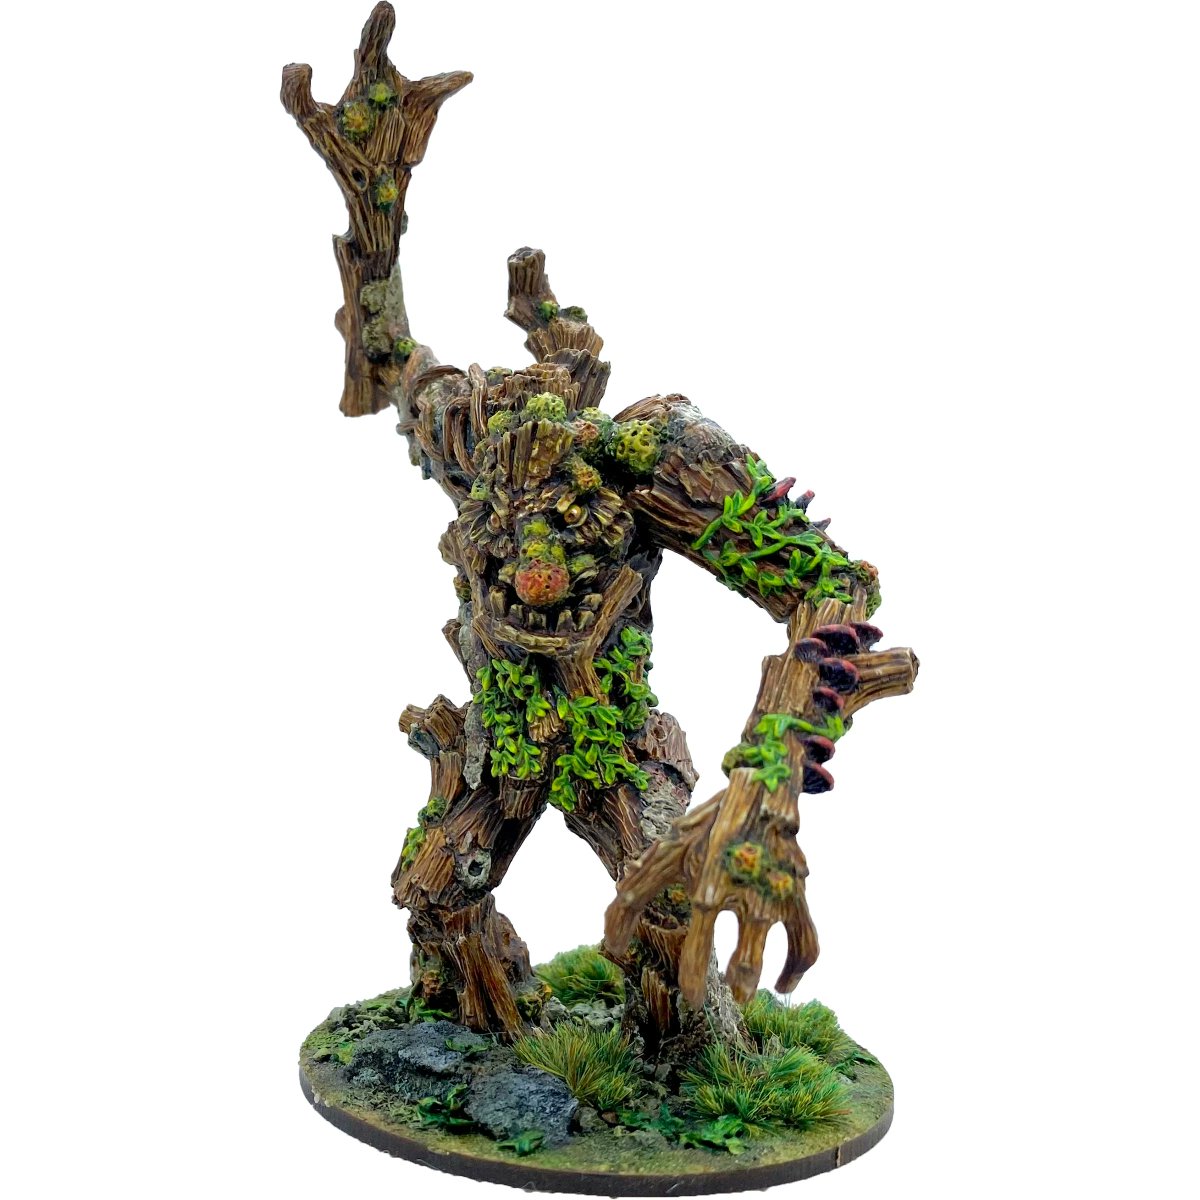 •Heartwood the Treeman Elder•
You too can grow big and strong if you eat the things that eat the greens
rebrand.ly/4tq1fyl
#footsore #footsoreminiatures #SPG #Harrowhyrst #TrishCardenDesigns #wargaming #warmongers #gaming #minwargaming #tabletopgames #miniatures #figures